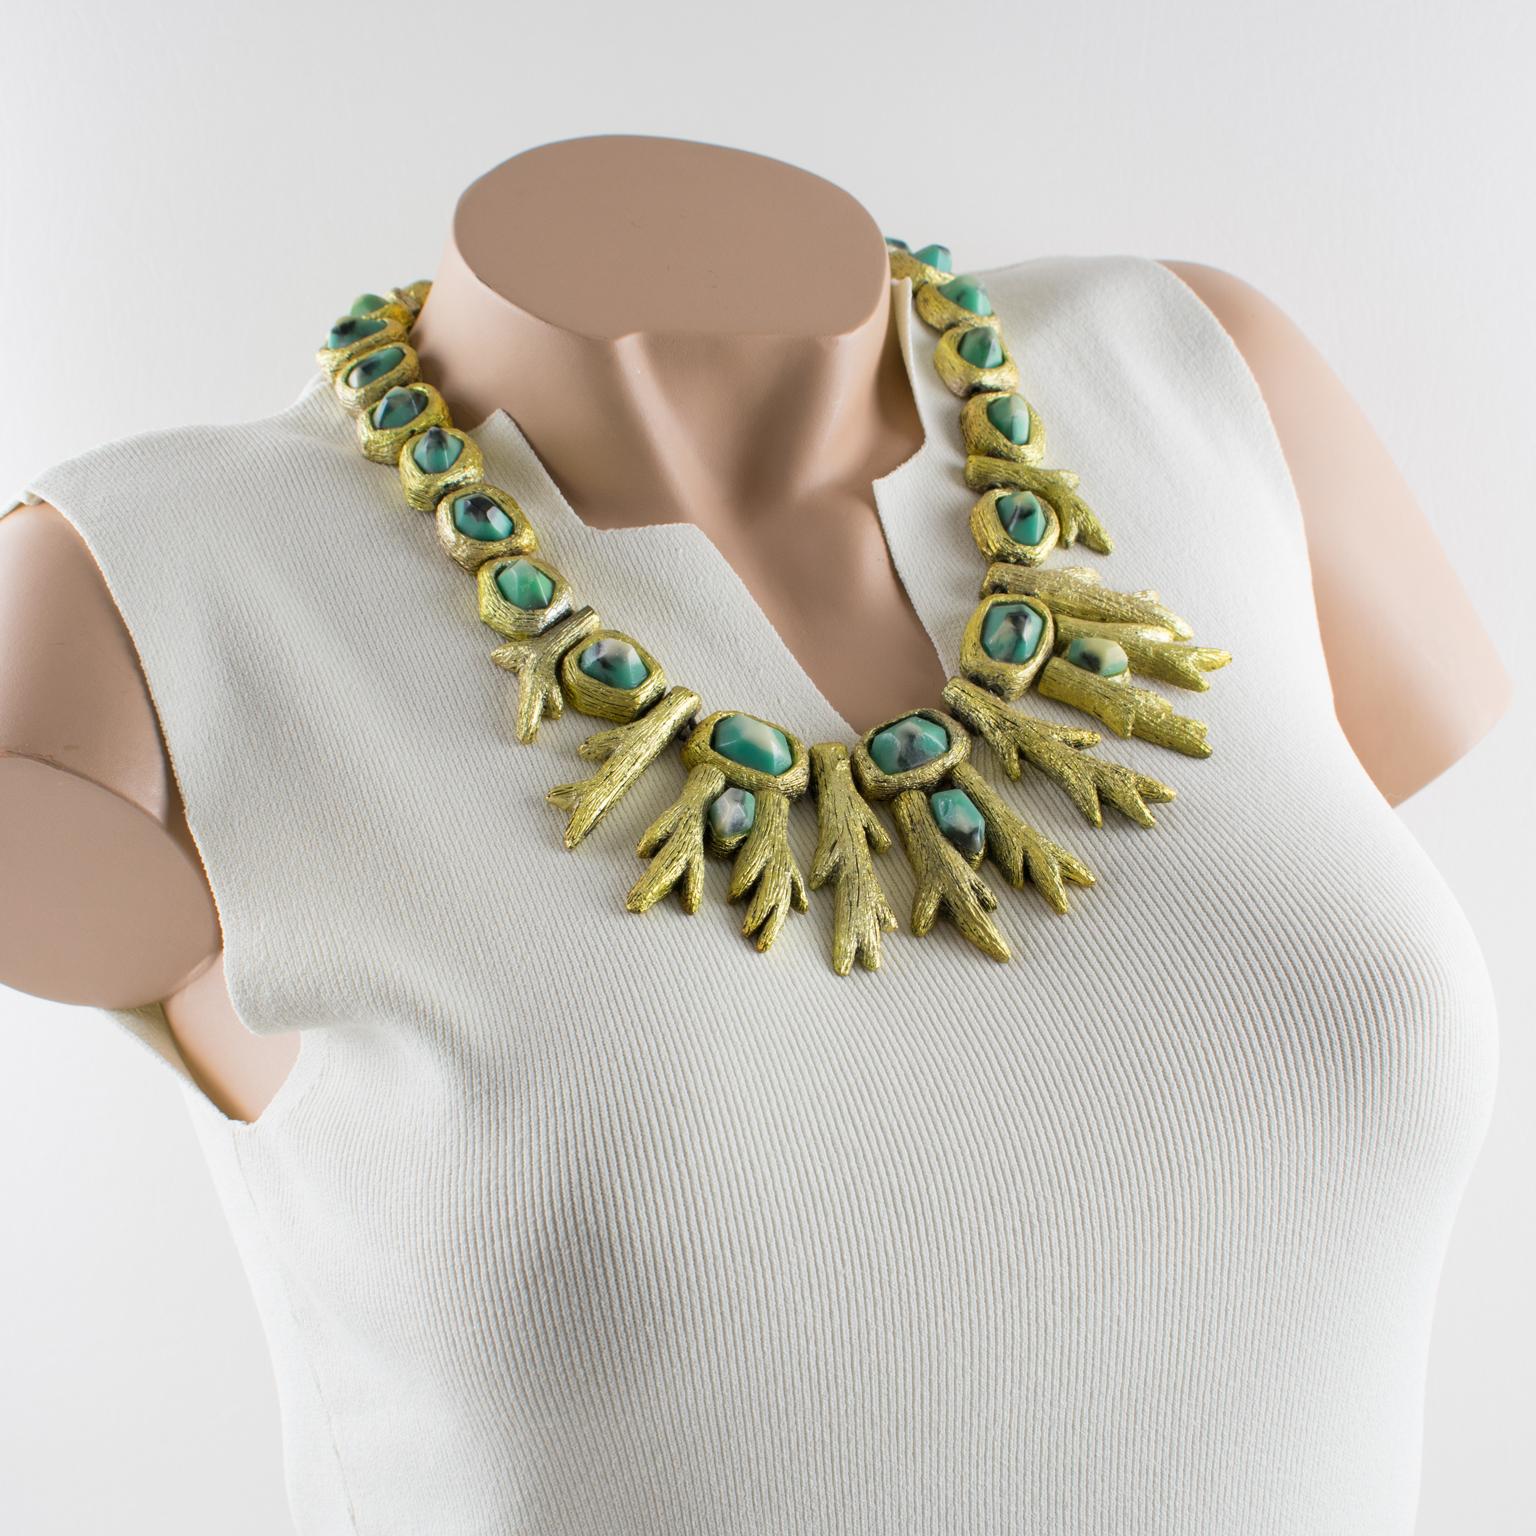 Bay area artist and sculptor Mary Oros created this bold sculptural necklace in the 1980s. The choker features an organic feel of branches shaped in cast resin with gilded metal coating topped with turquoise blue, white, and black resin cabochons.